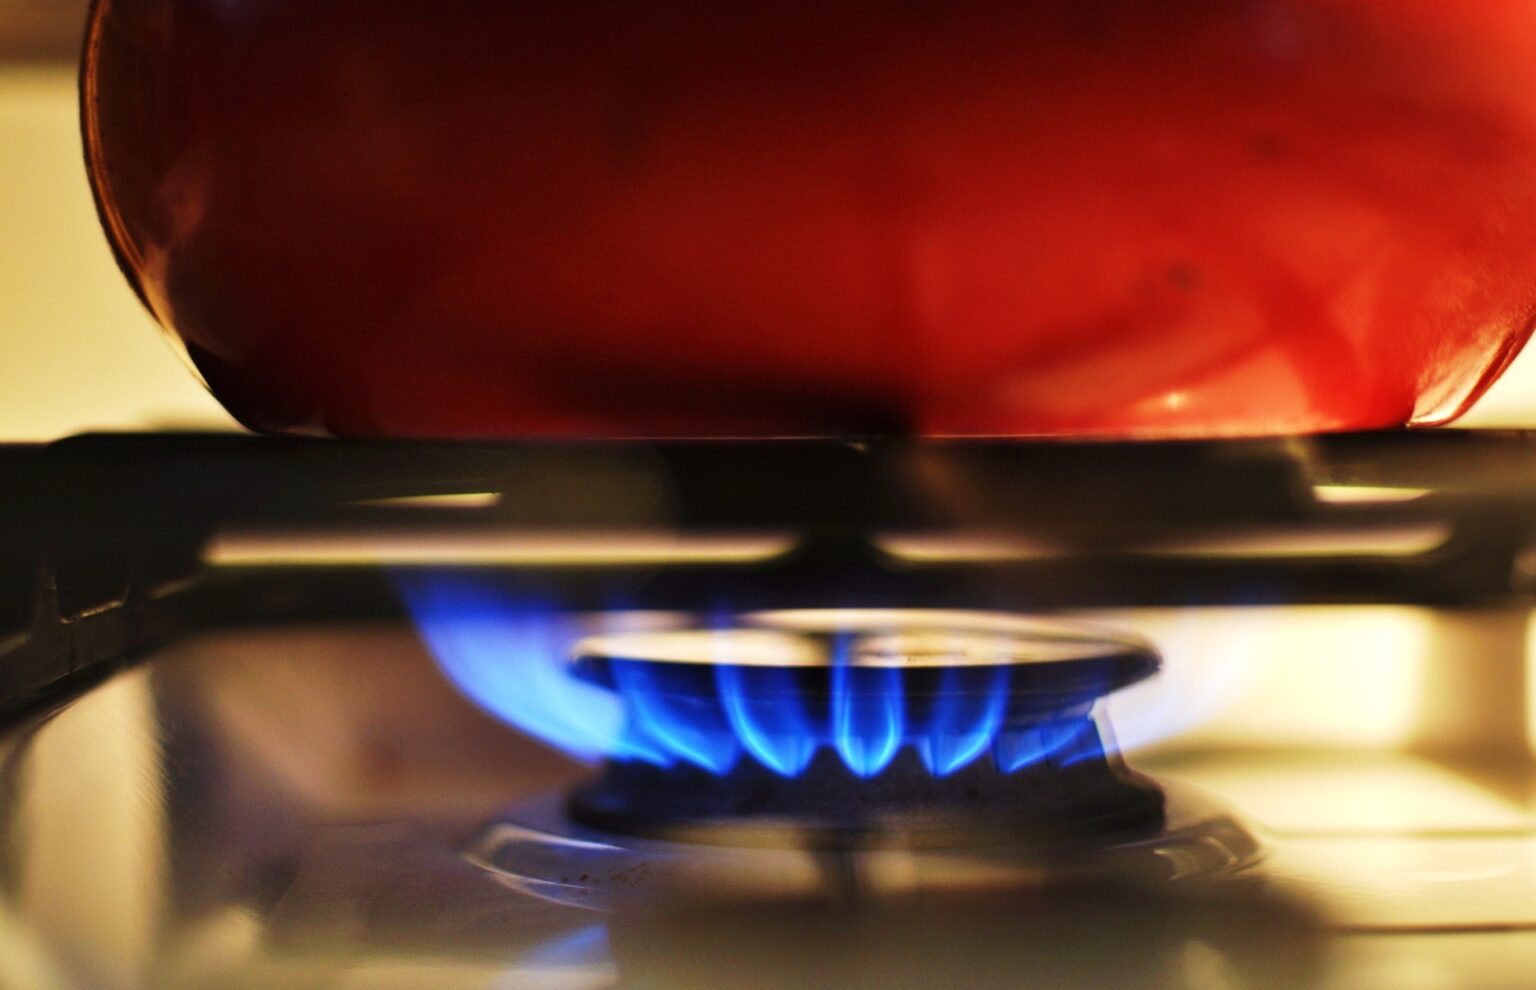 Bottom of red cooking pot sitting on a gas stove with blue flames